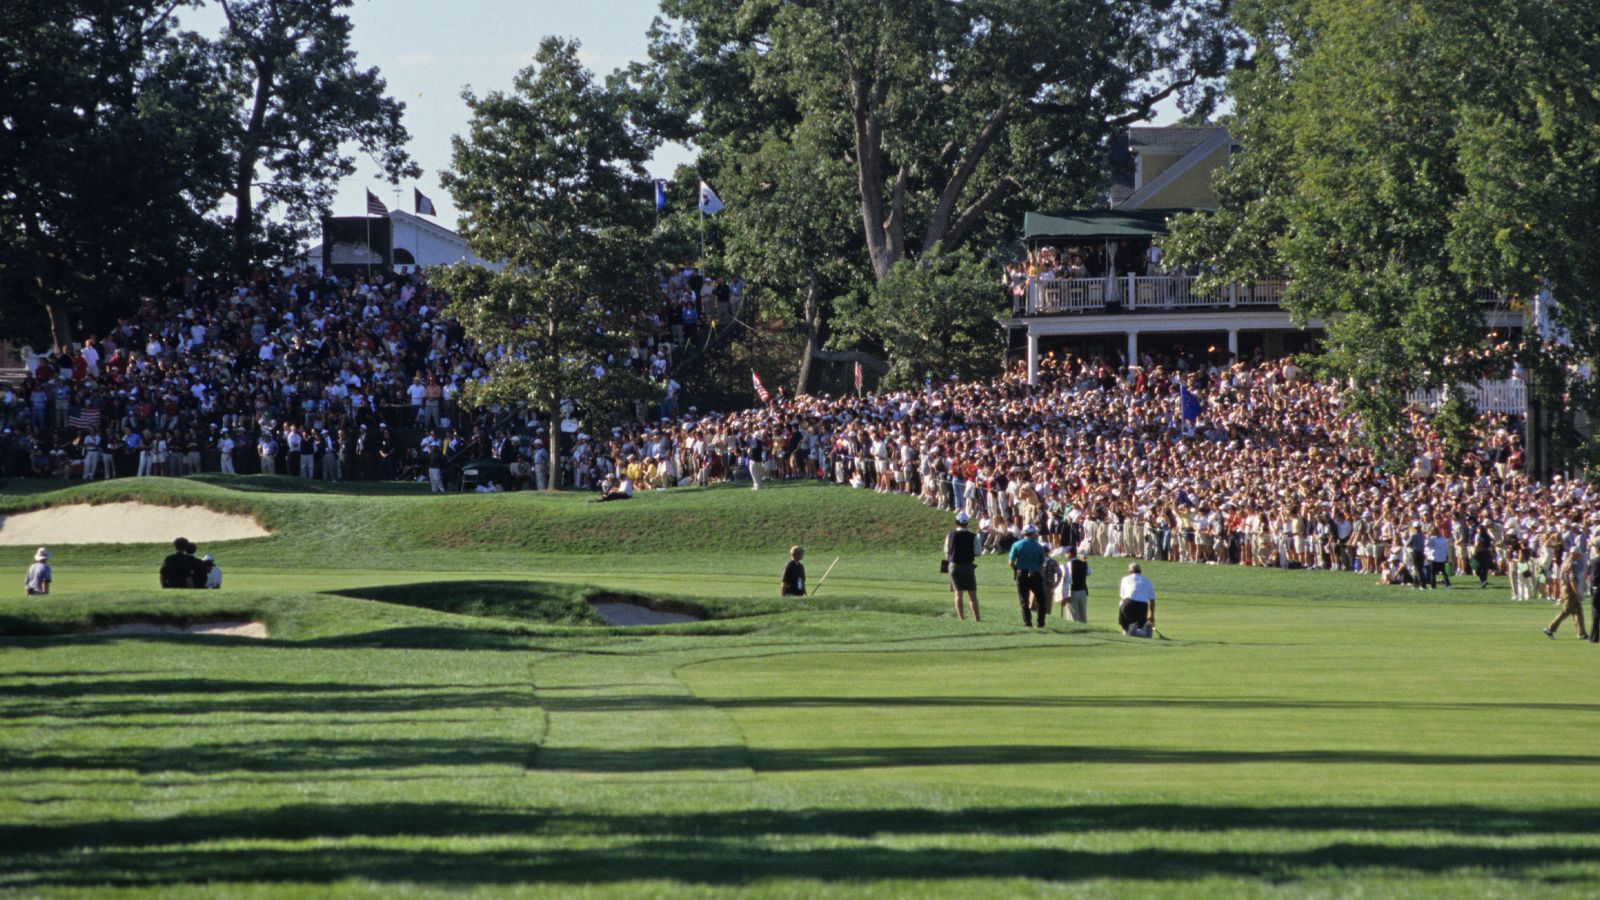 The gallery at the 33rd Ryder Cup Matches held at The Country Club in Brookline, Massachusetts, 1999.